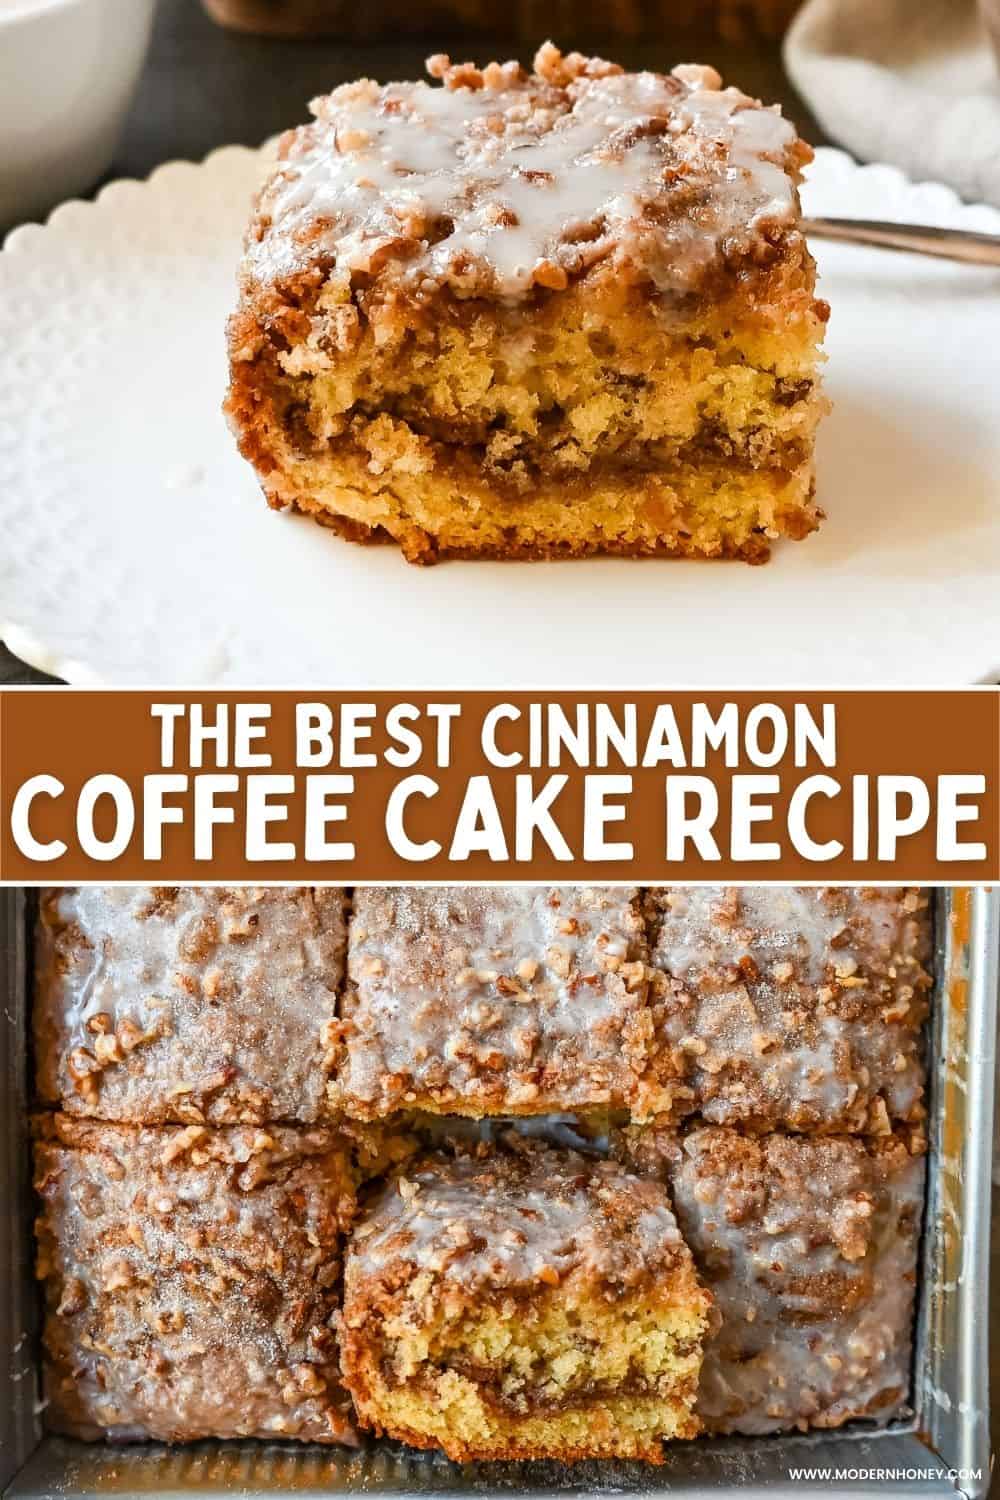 Best Coffee Cake Recipe. This cinnamon brown sugar sour cream coffee cake is made with a buttery cake layered with a brown sugar cinnamon layer and topped with a streusel topping and a sweet glaze. The best coffee cake recipe perfect for breakfast or brunch. A perfect Christmas breakfast recipe.